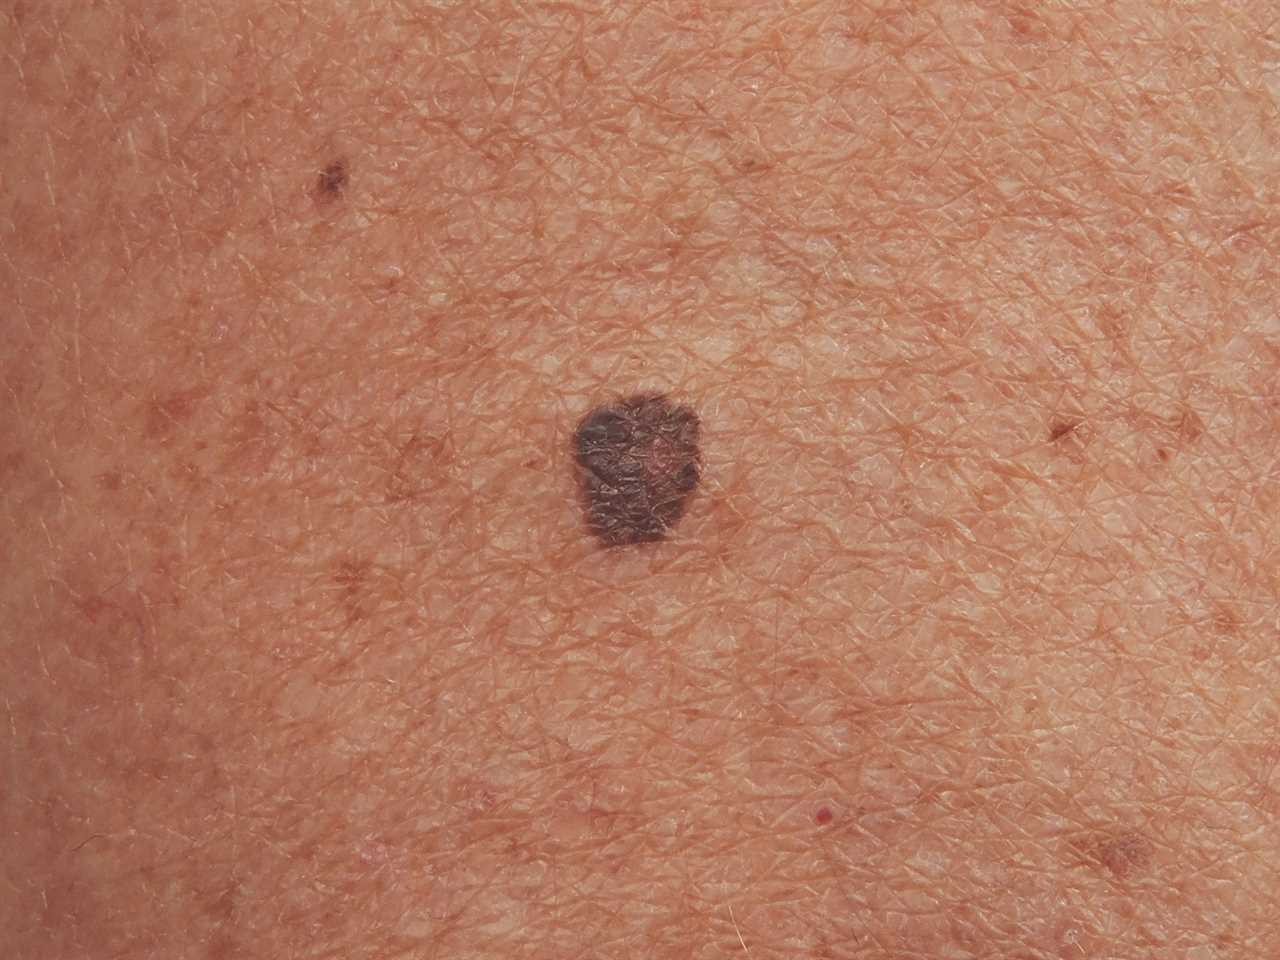 Skin Cancer Signs: What You Need to Know